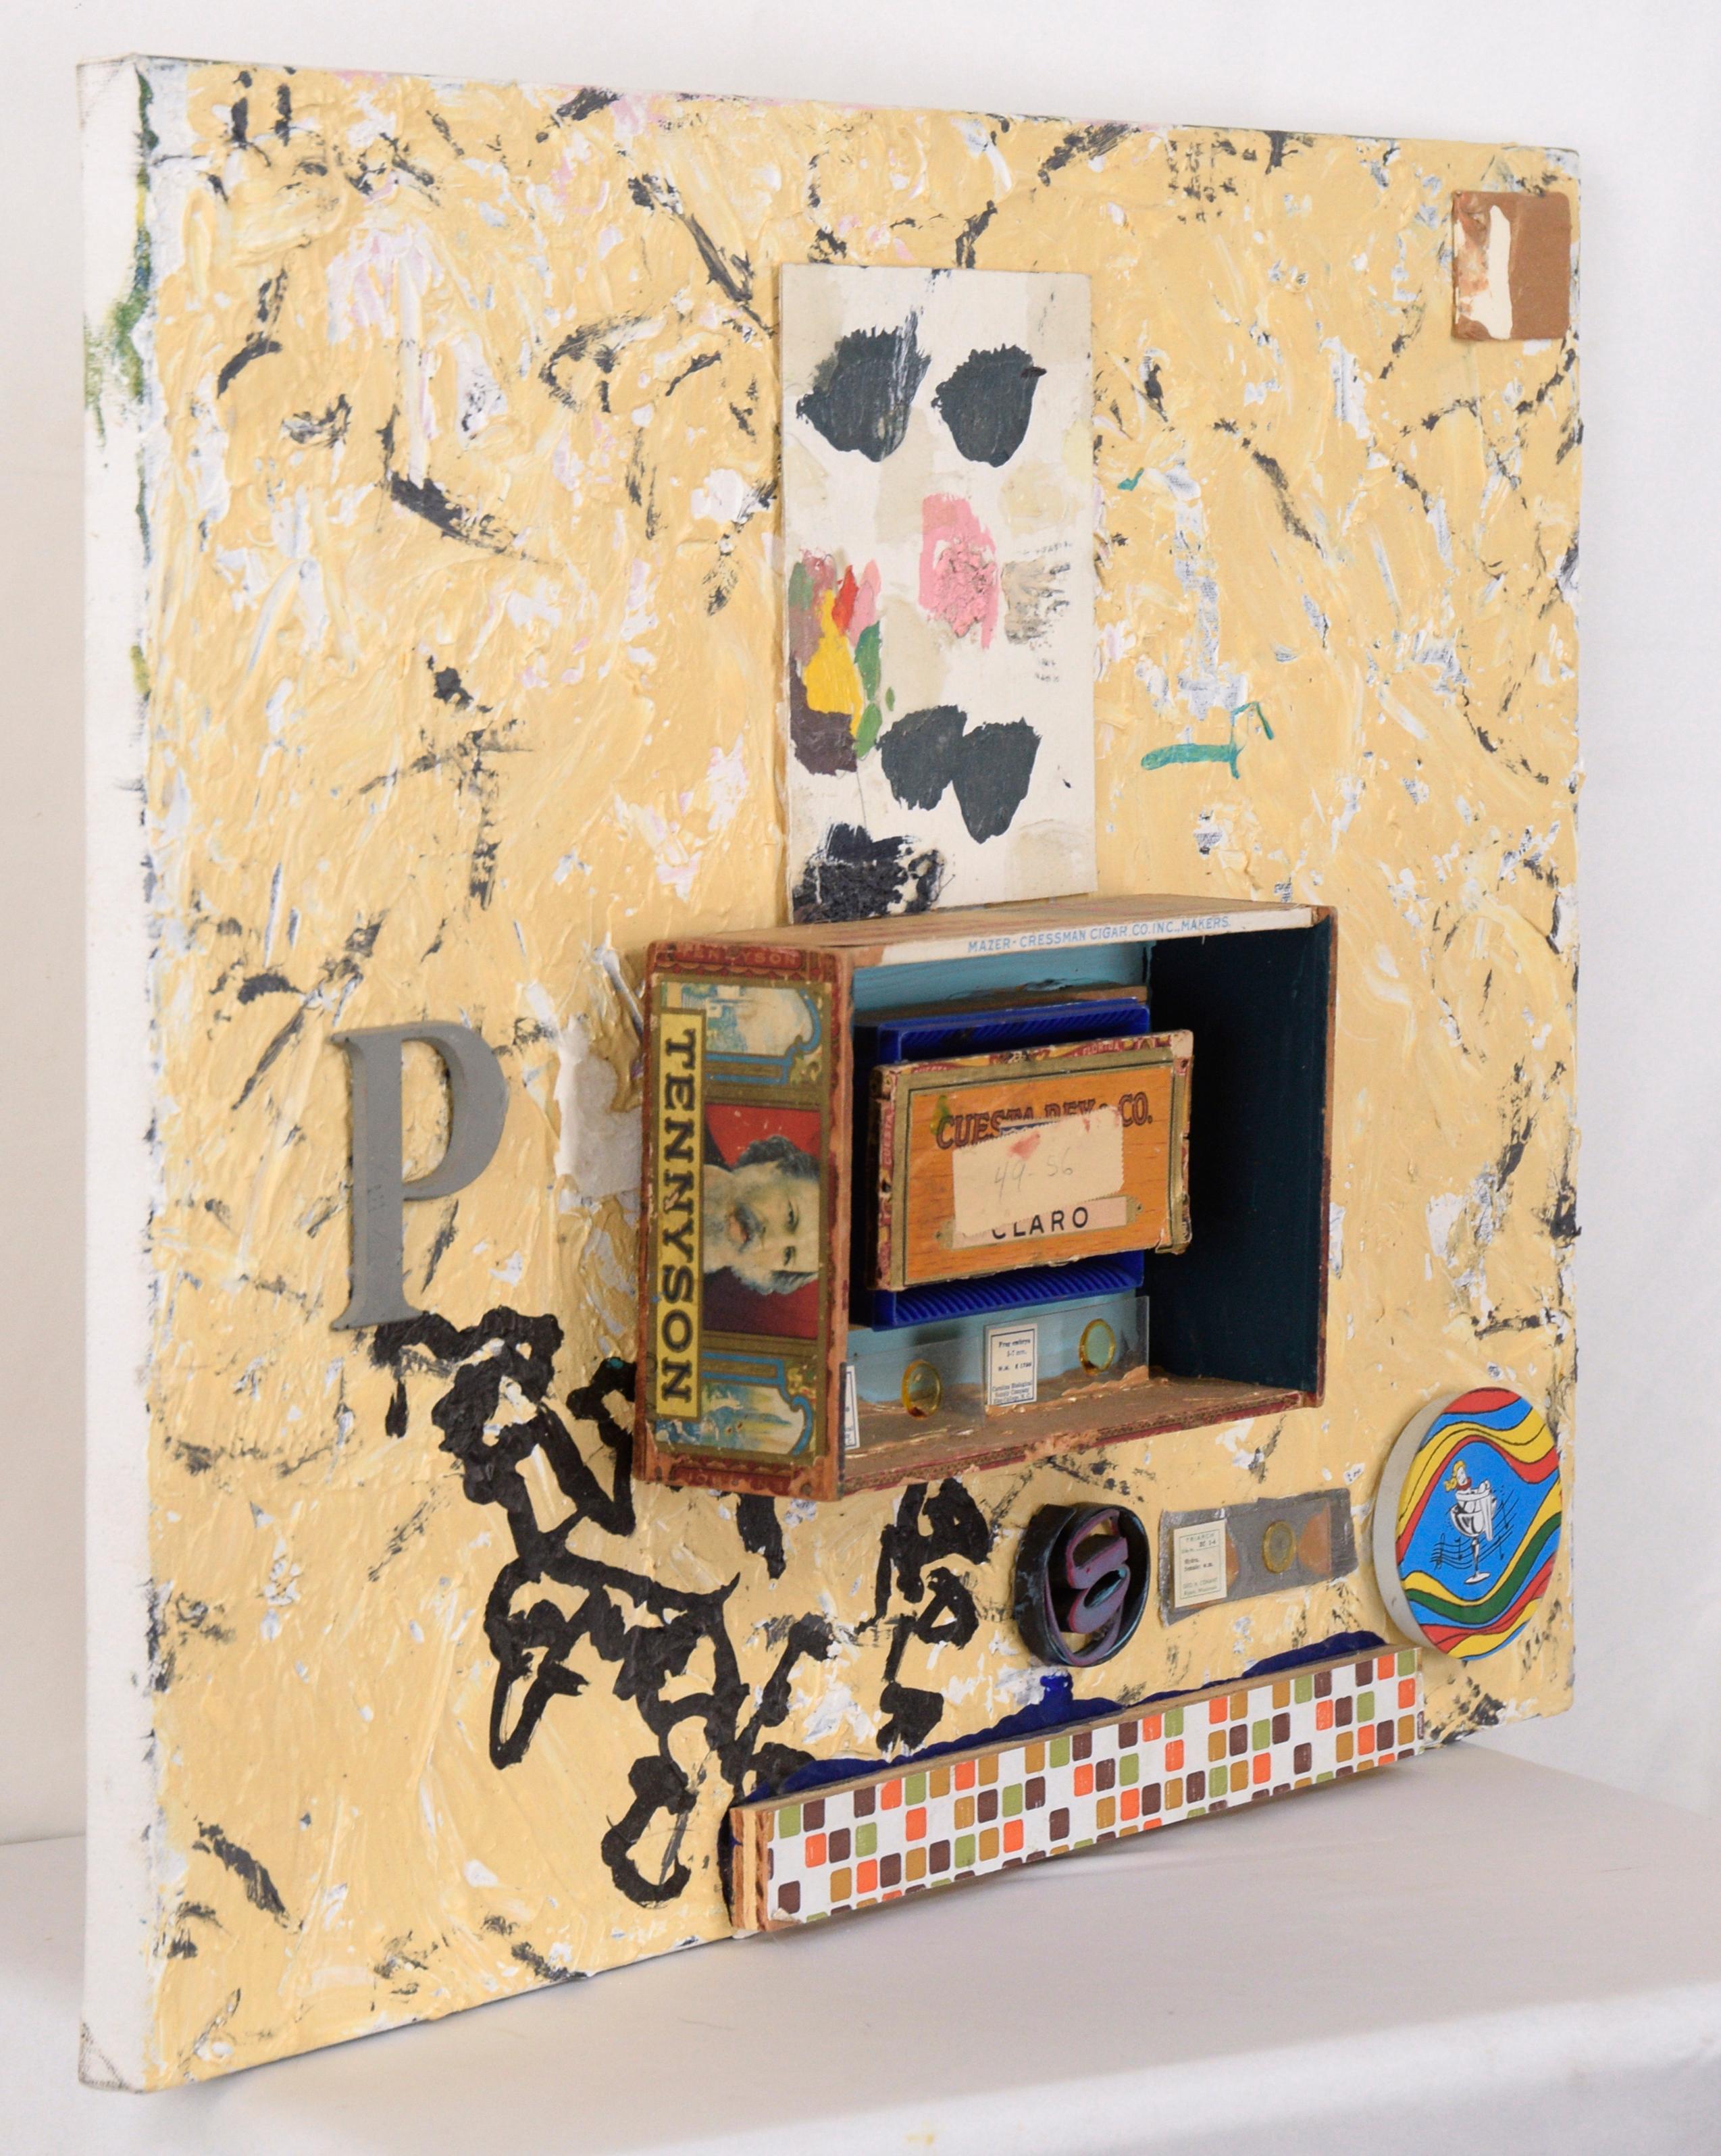 Assemblage with Cigar Box and the Letter P - Sculpture by Michael Pauker 